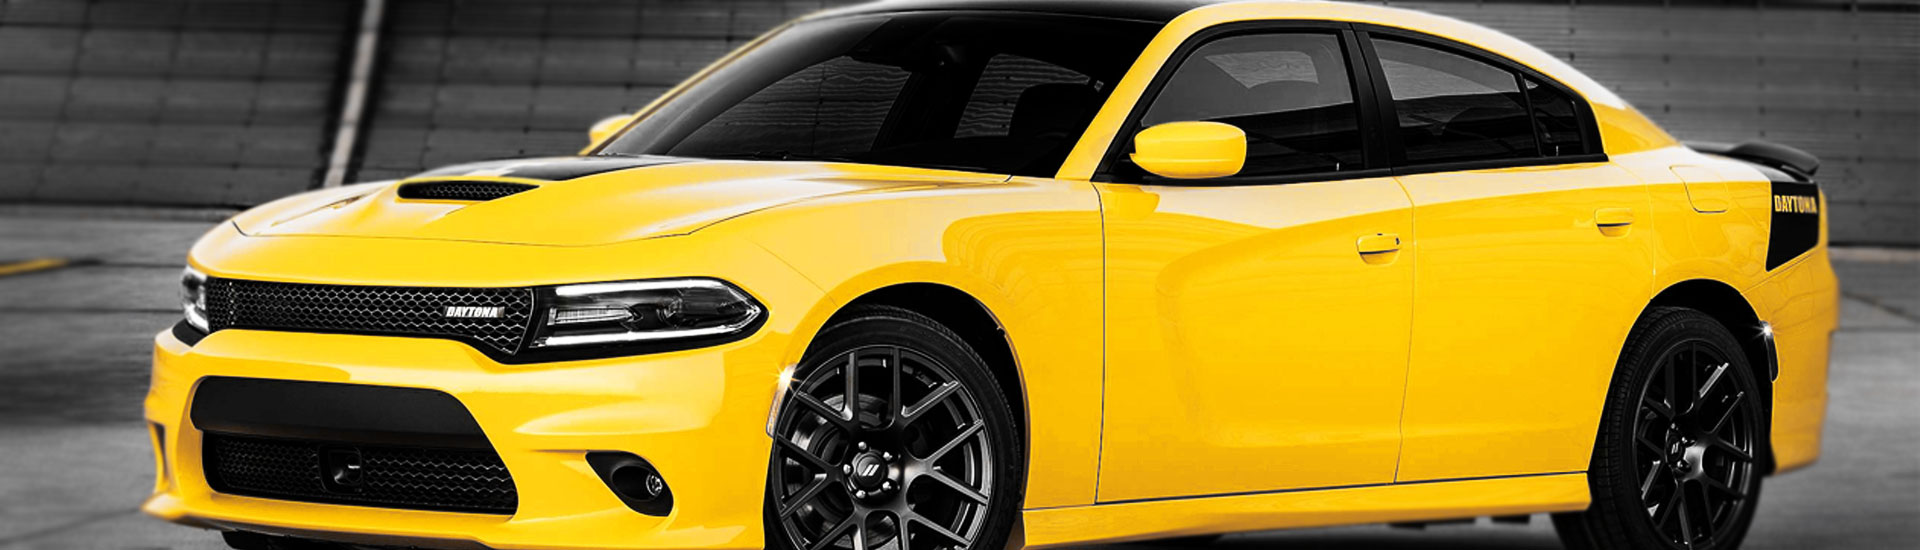 2020 Dodge Charger Window Tint